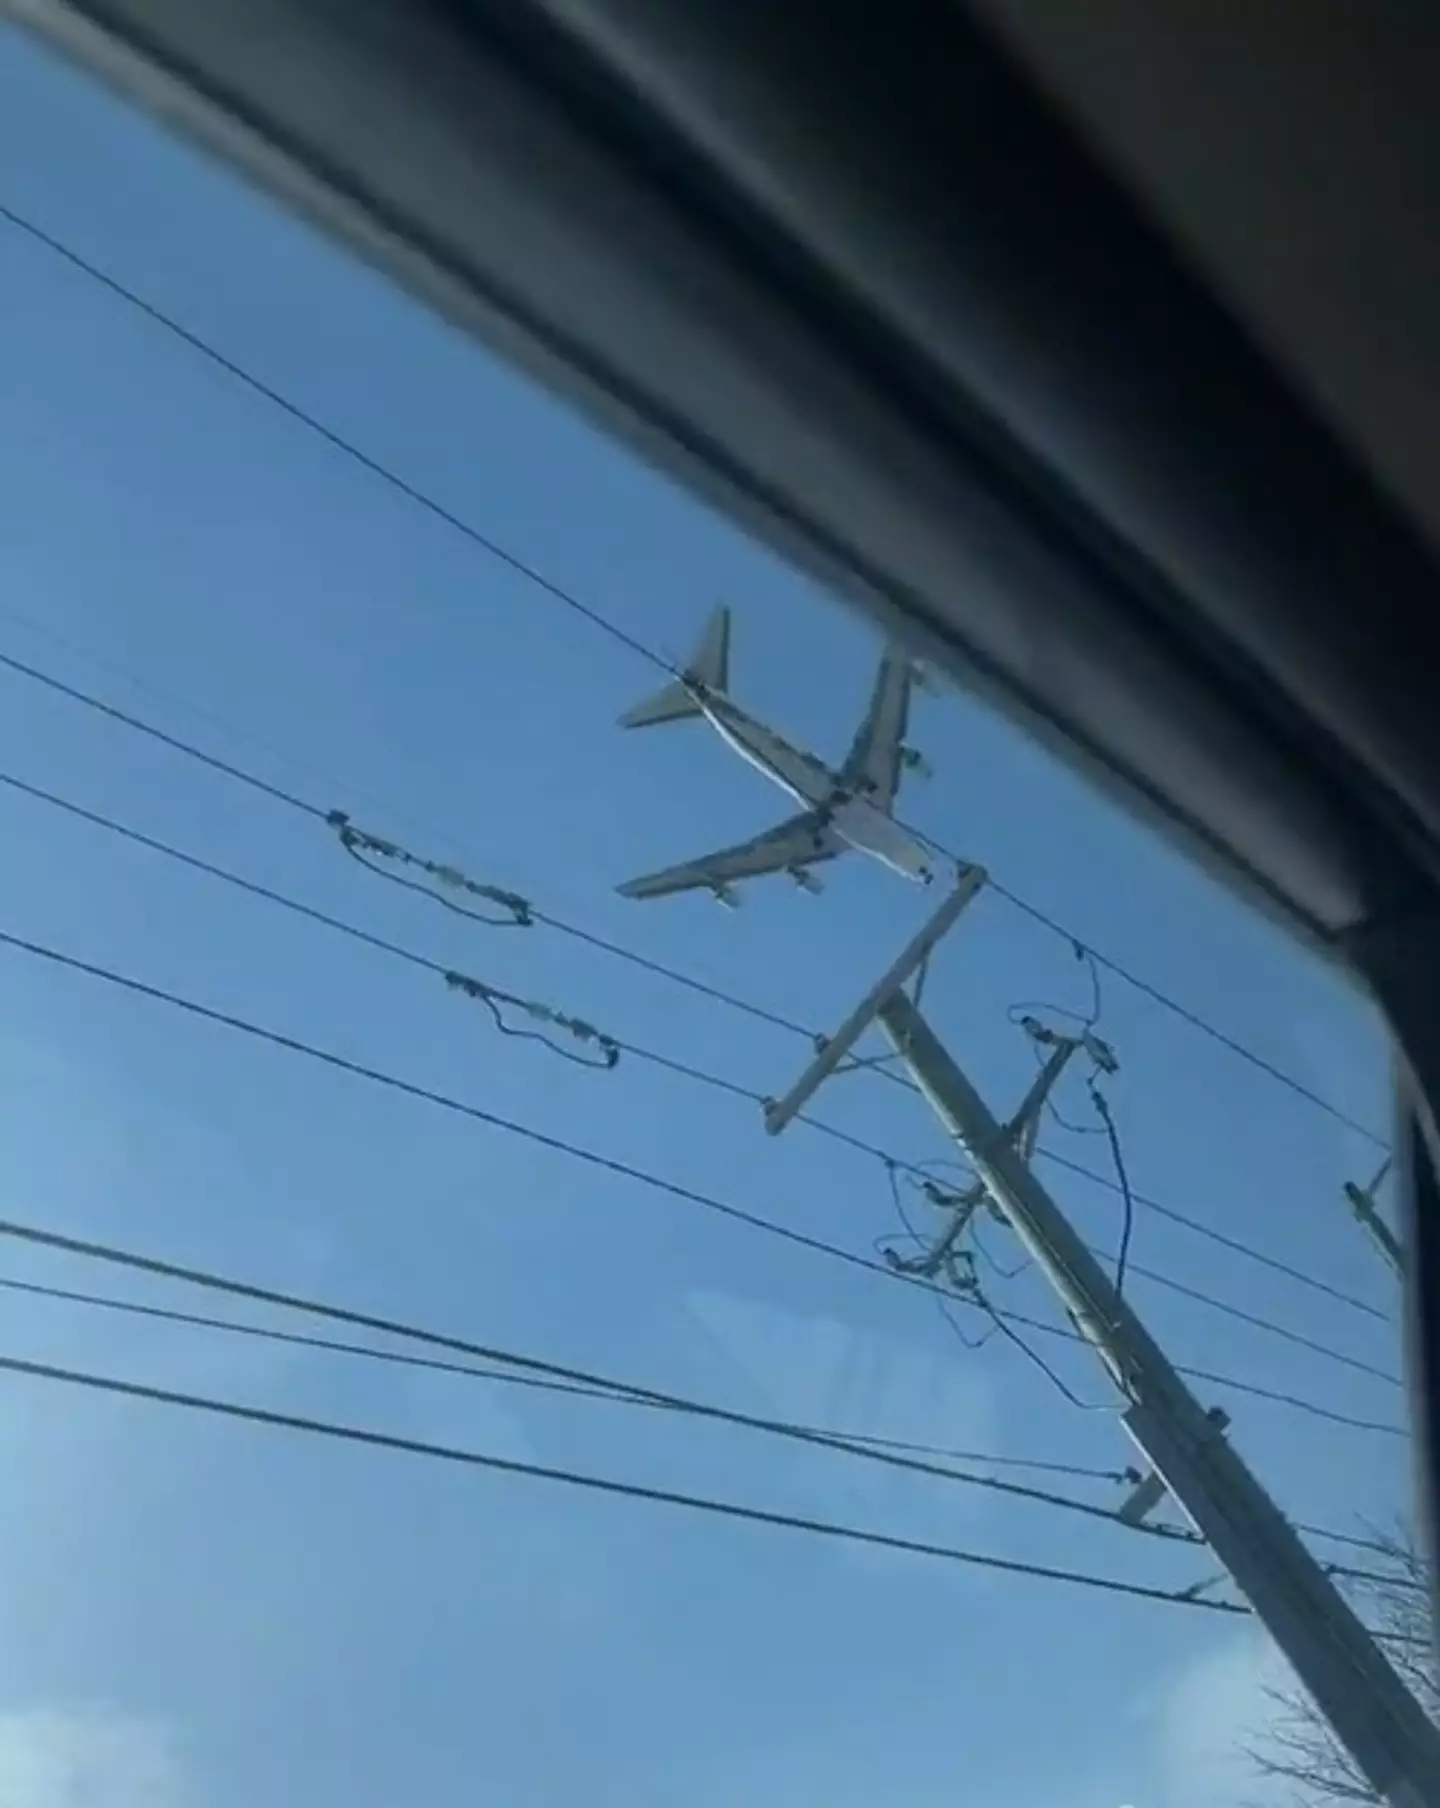 The plane appeared to be stationary in the video.